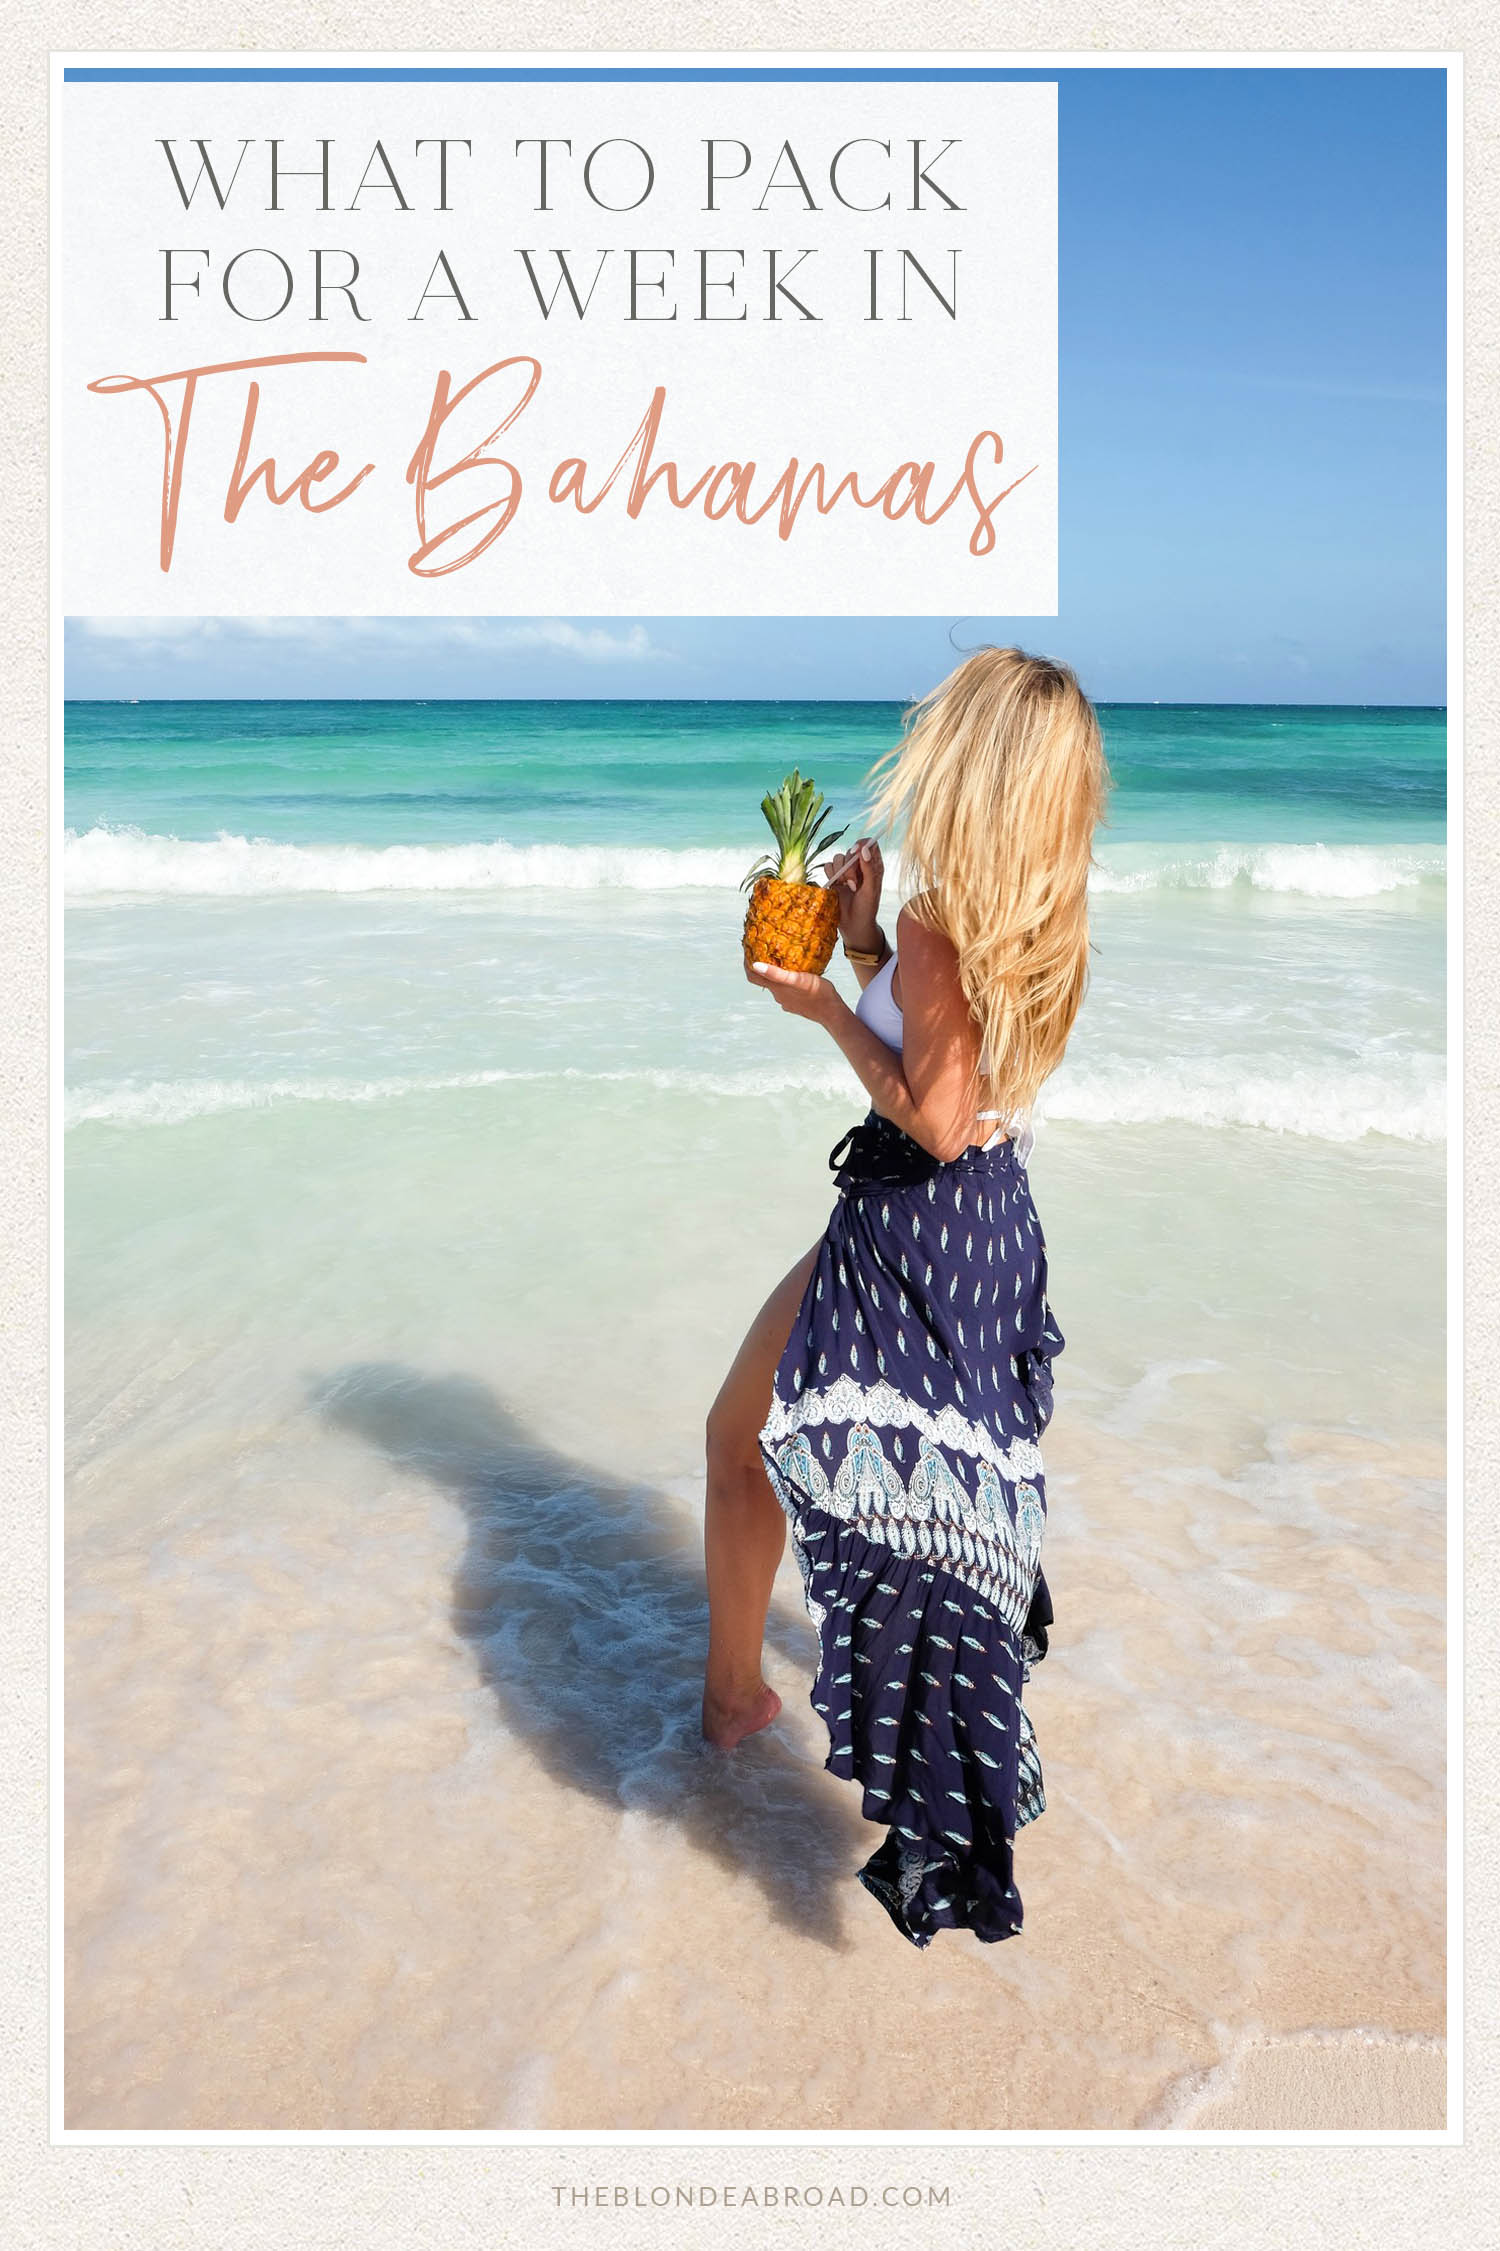 What to Pack for a Week Bahamas